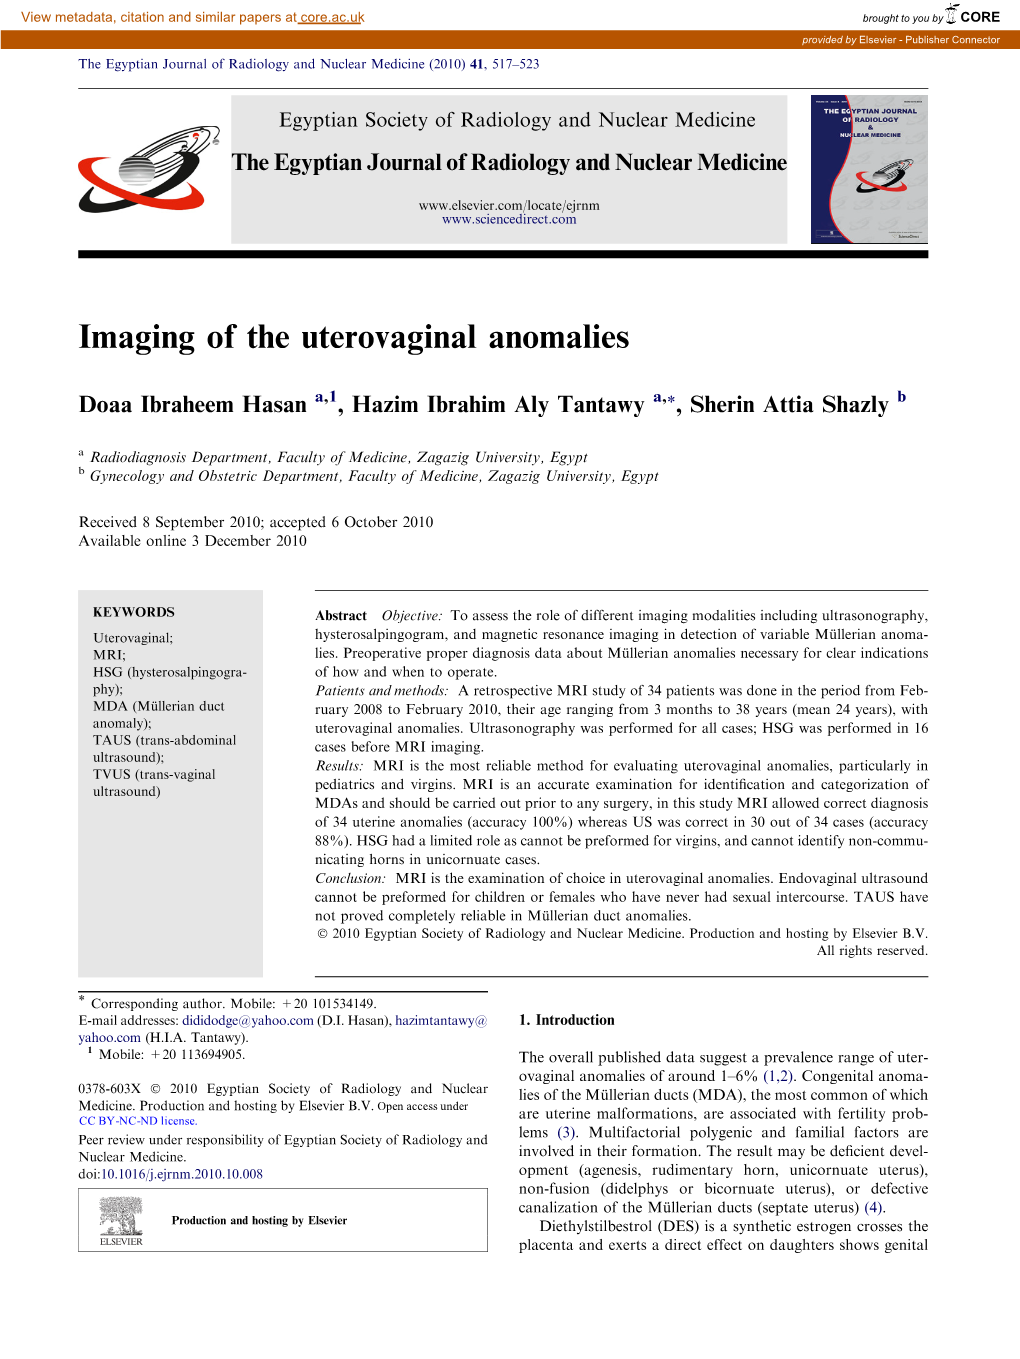 Imaging of the Uterovaginal Anomalies